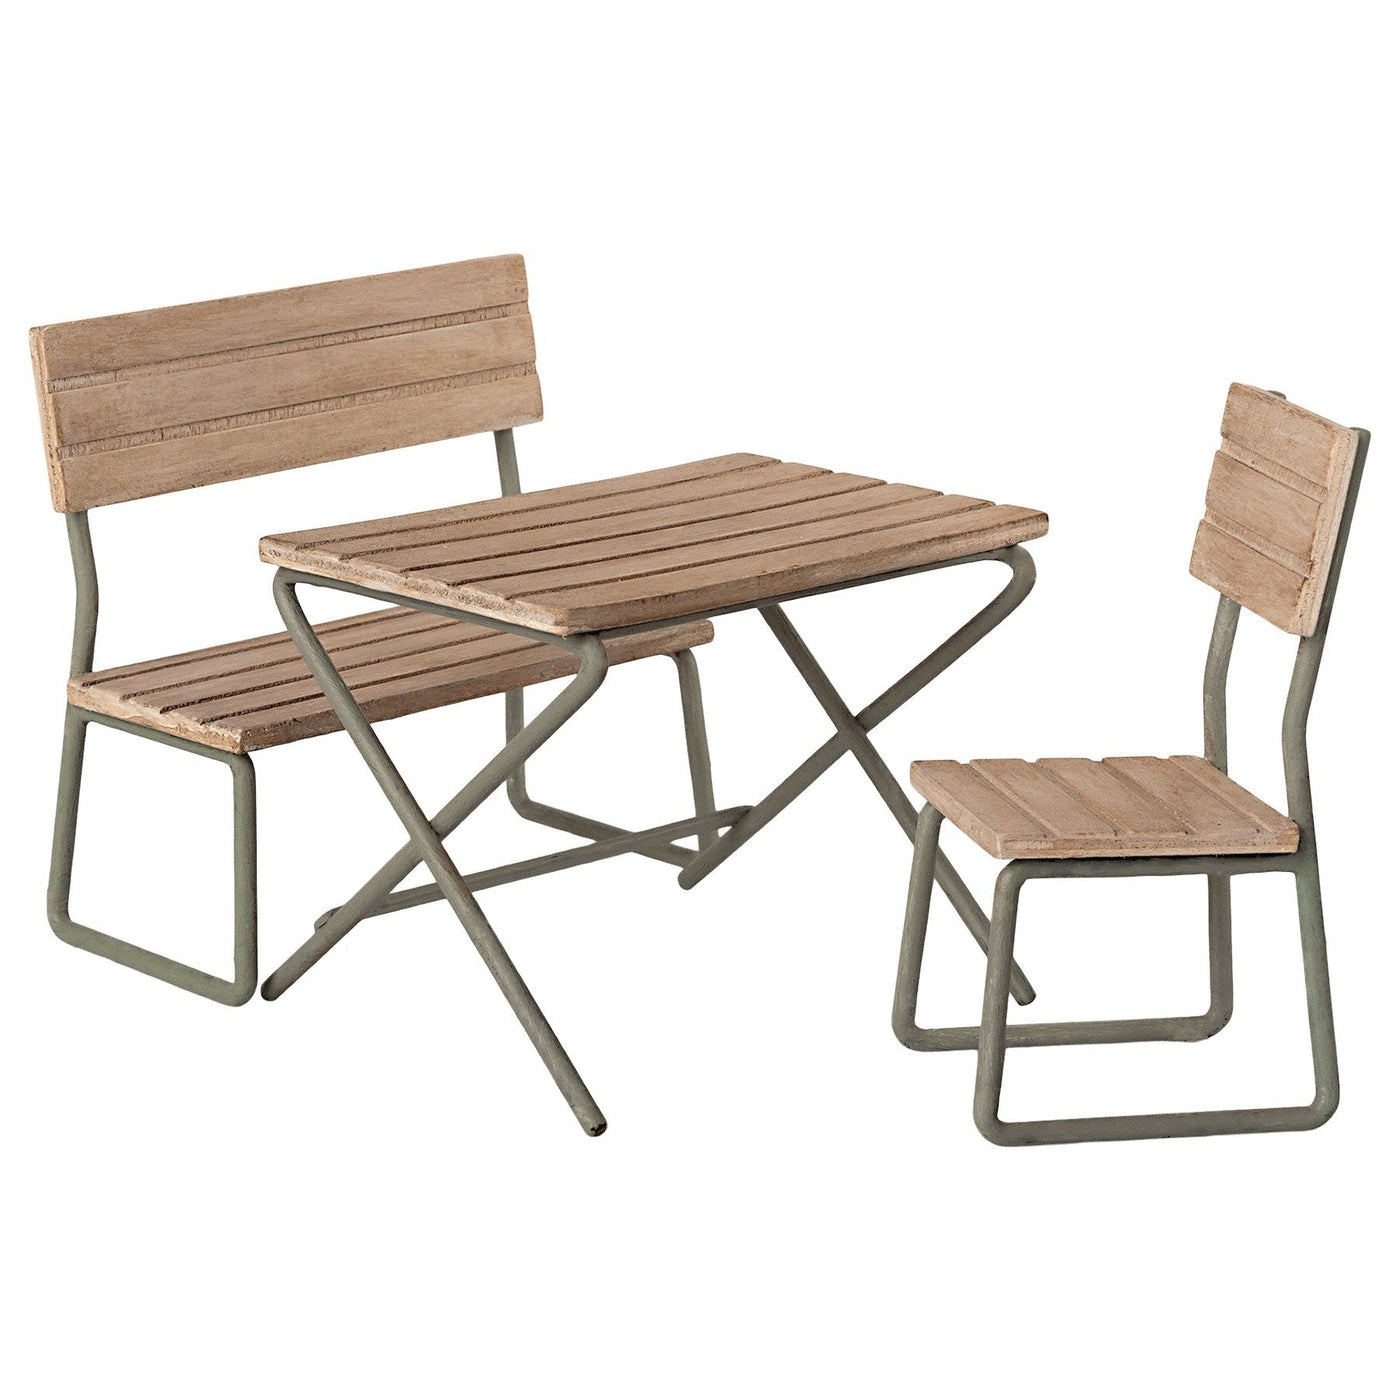 Miniature Garden Table Set with Chair & Bench